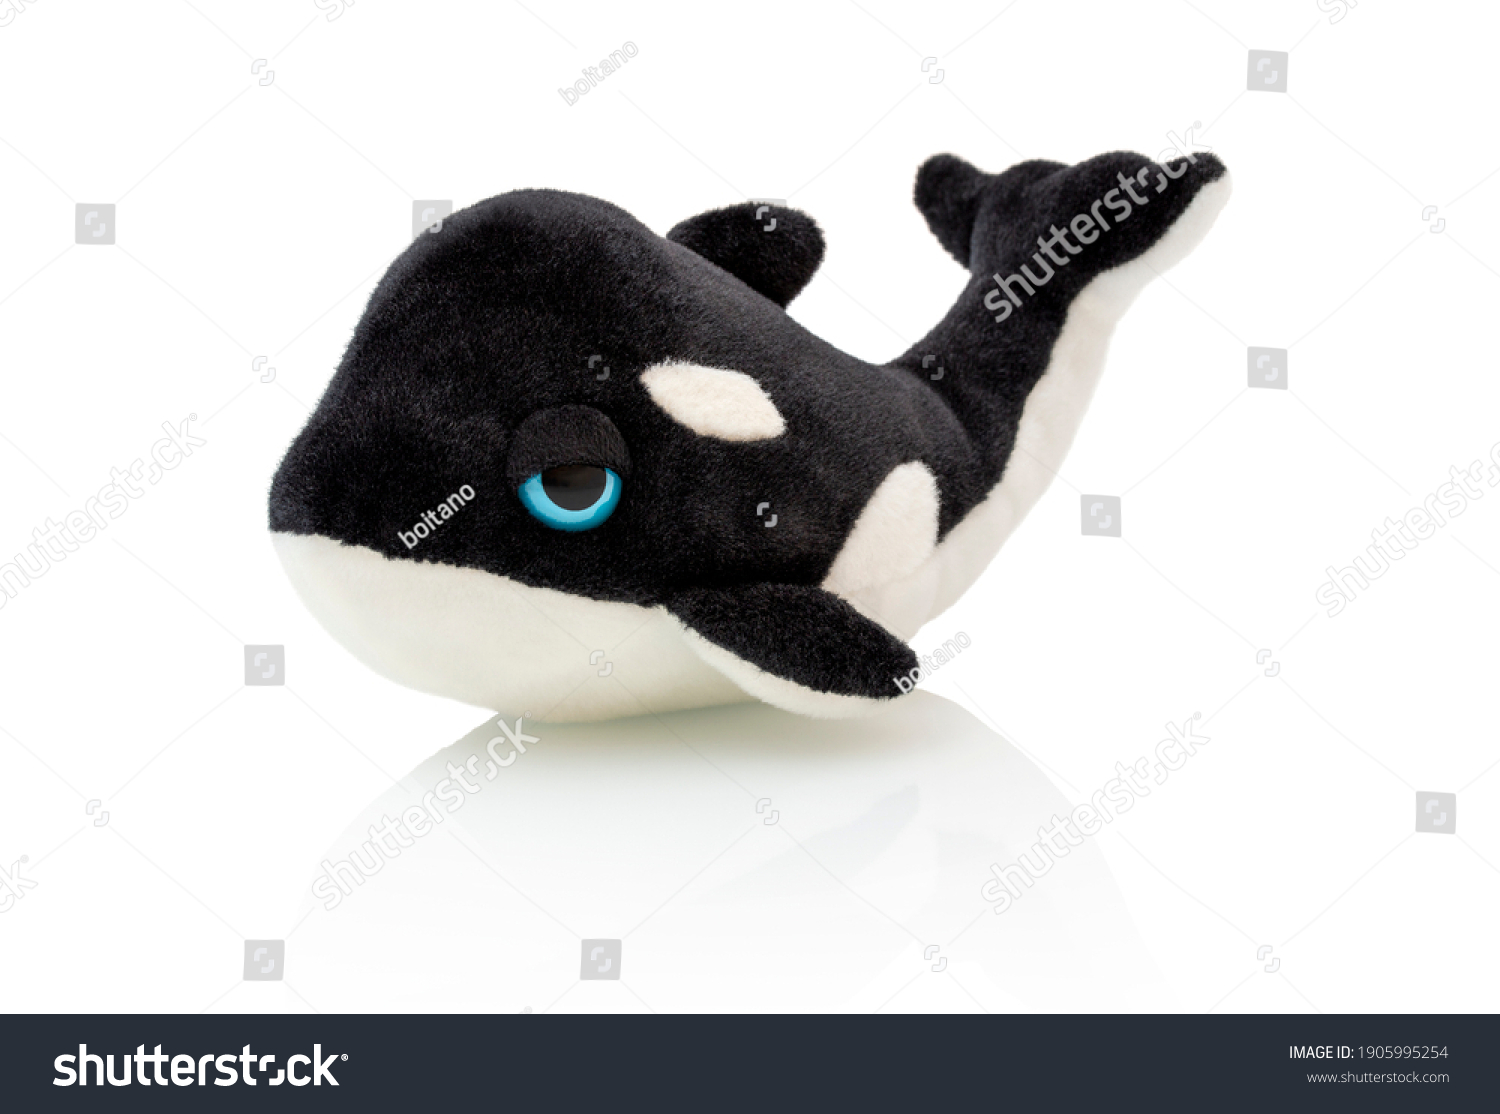 Killer whale plushie doll isolated on white background with shadow reflection. Plush stuffed orca  on white backdrop. Fluffy puppet toy for children. Cute furry plaything for kids. Black fish. #1905995254